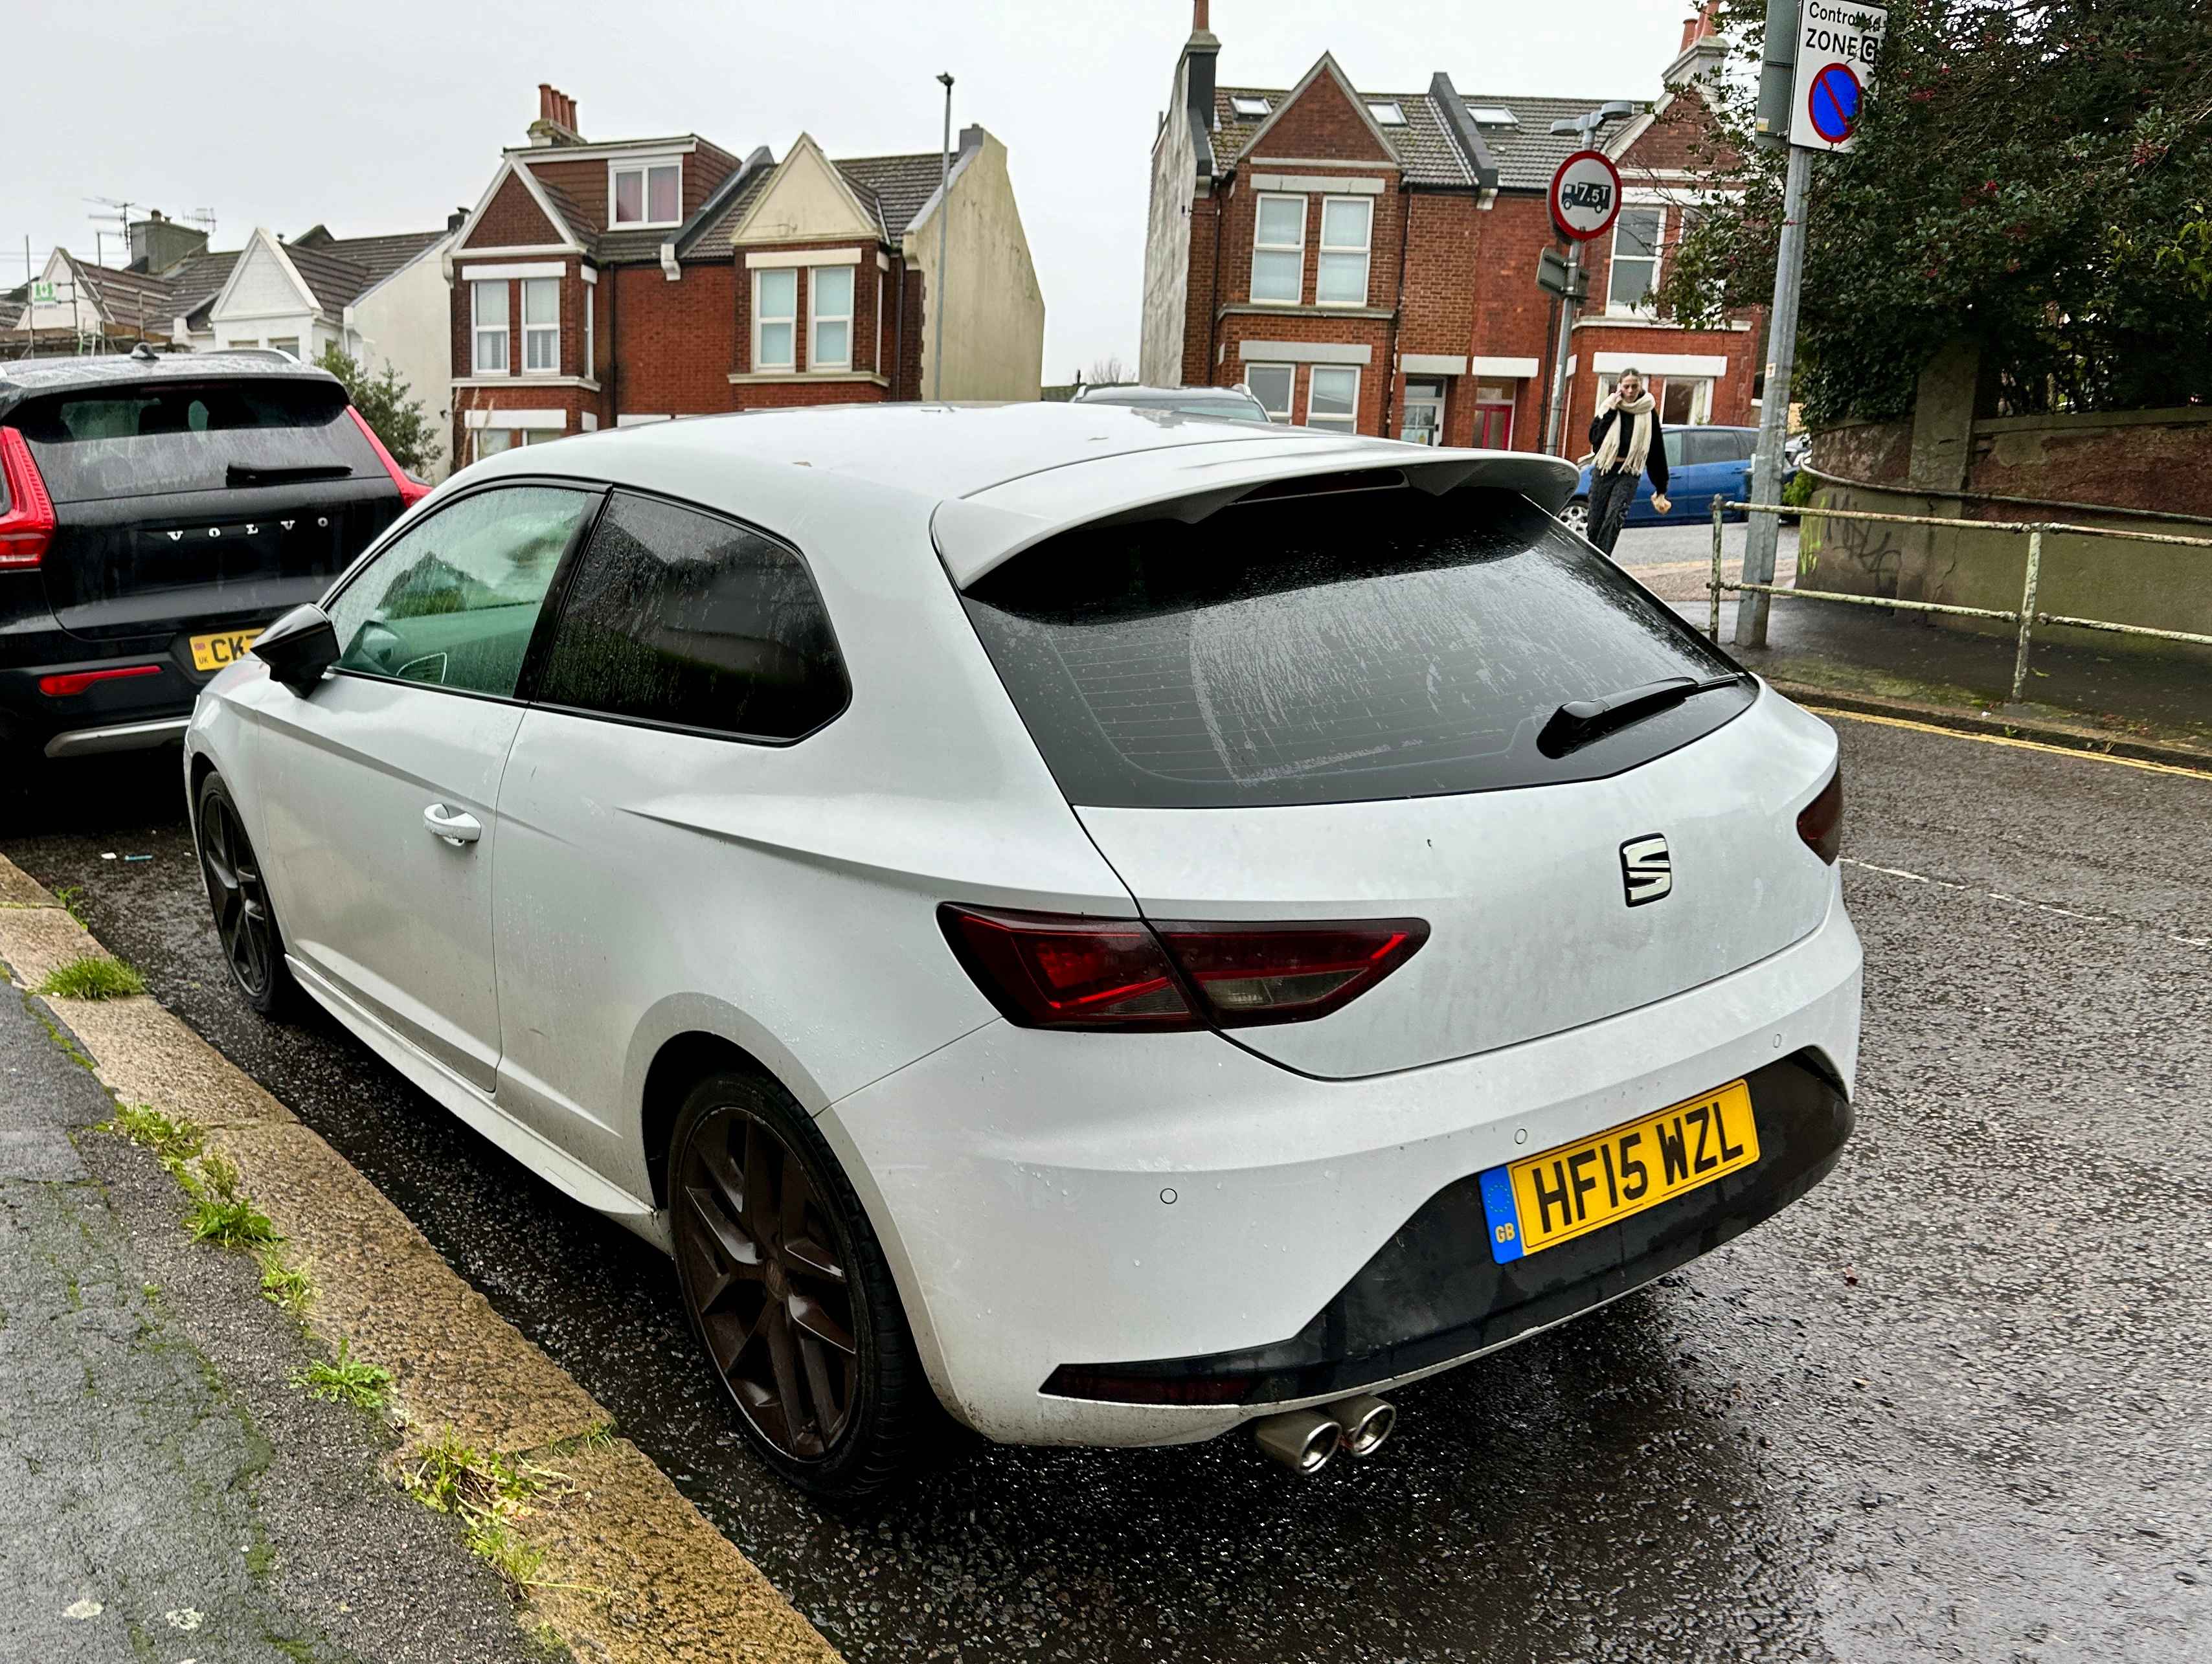 Photograph of HF15 WZL - a White Seat Leon parked in Hollingdean by a non-resident. The third of three photographs supplied by the residents of Hollingdean.